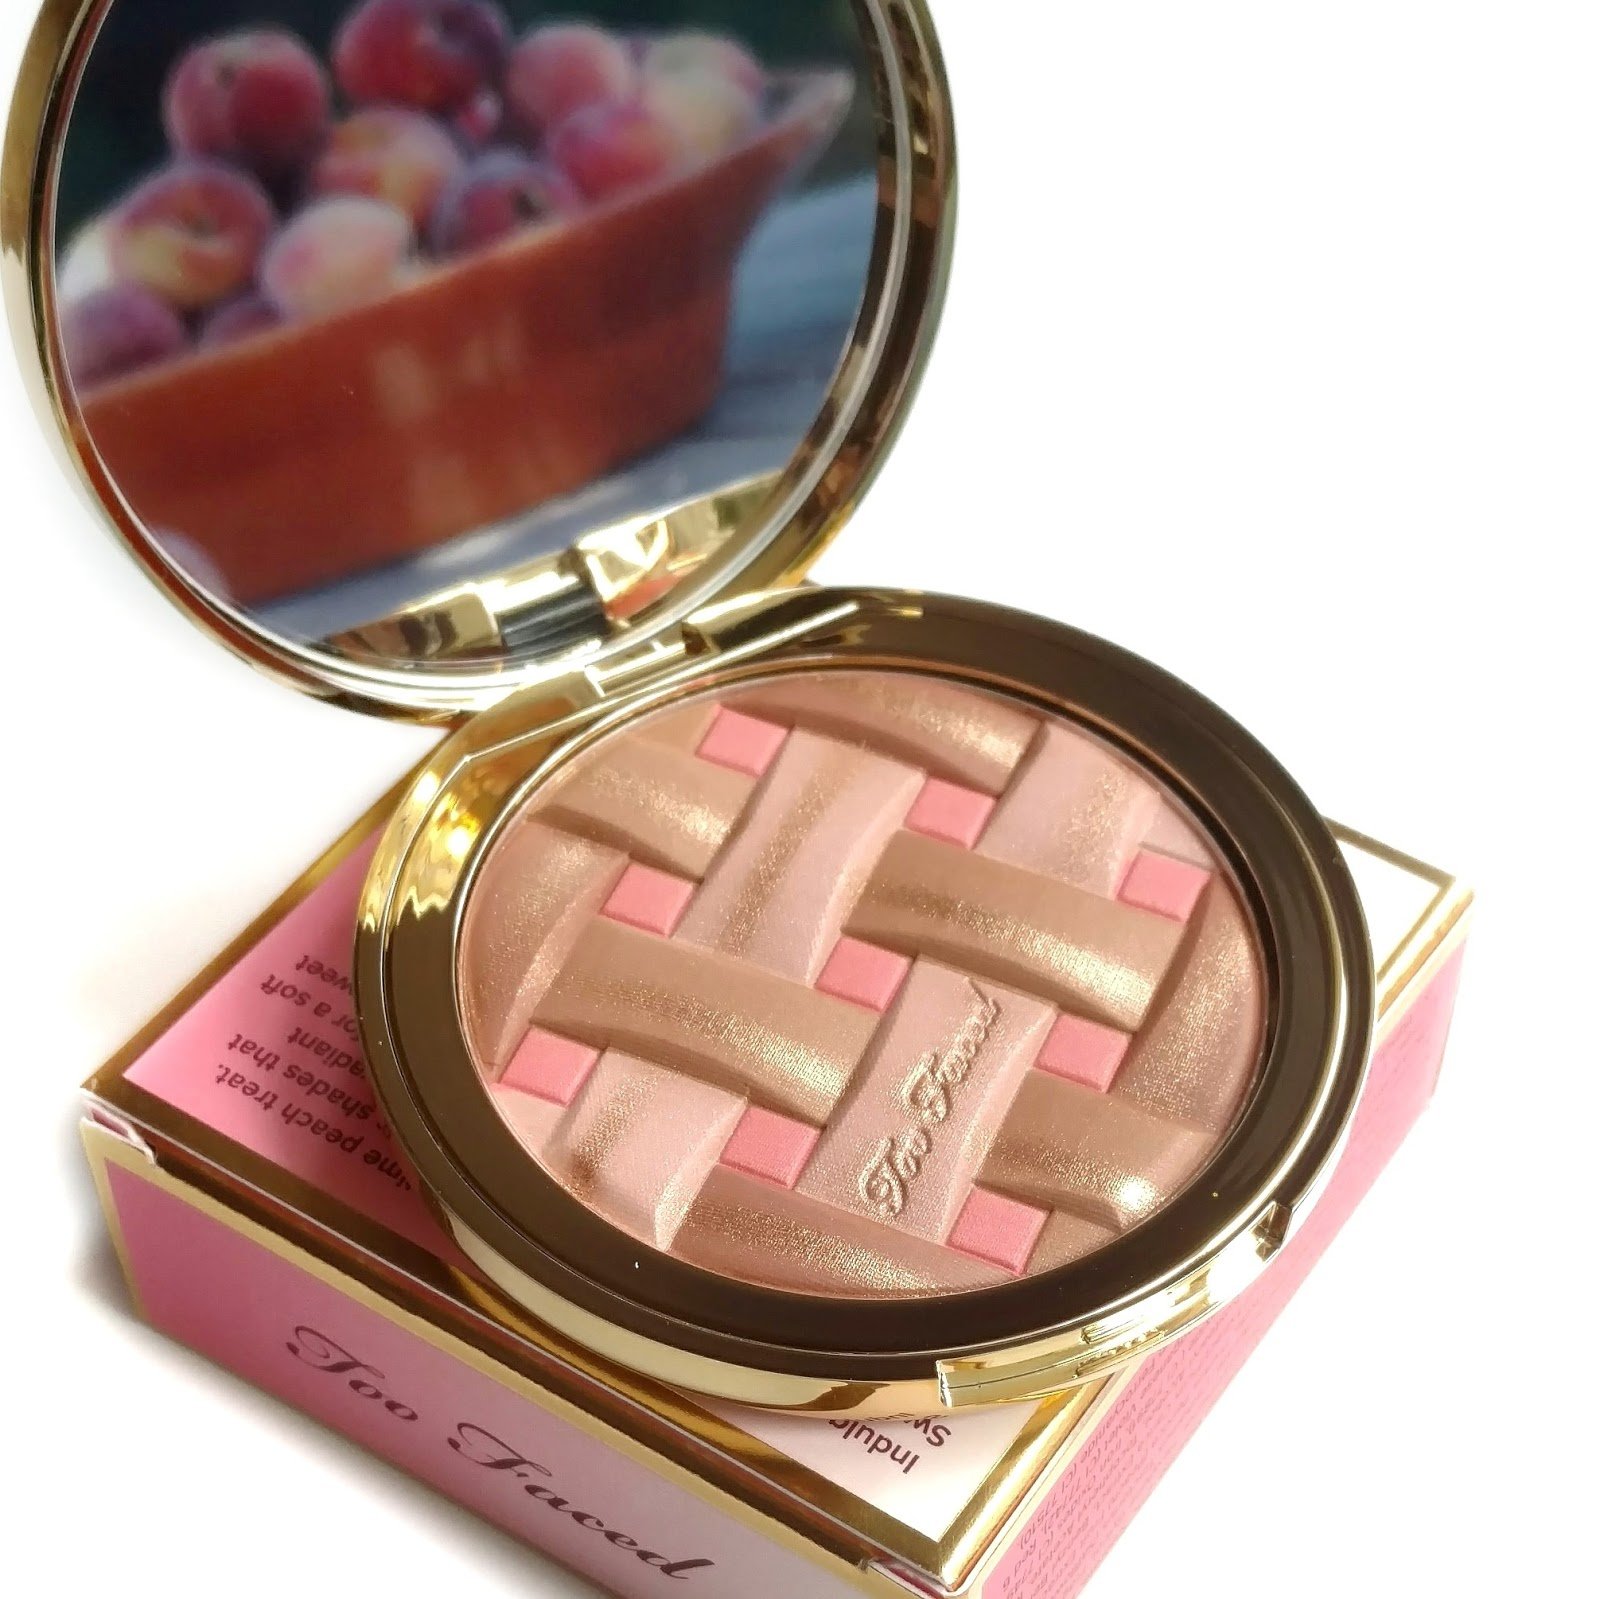 Too Faced Sweetie Pie Radiant Matte Bronzer Review ...